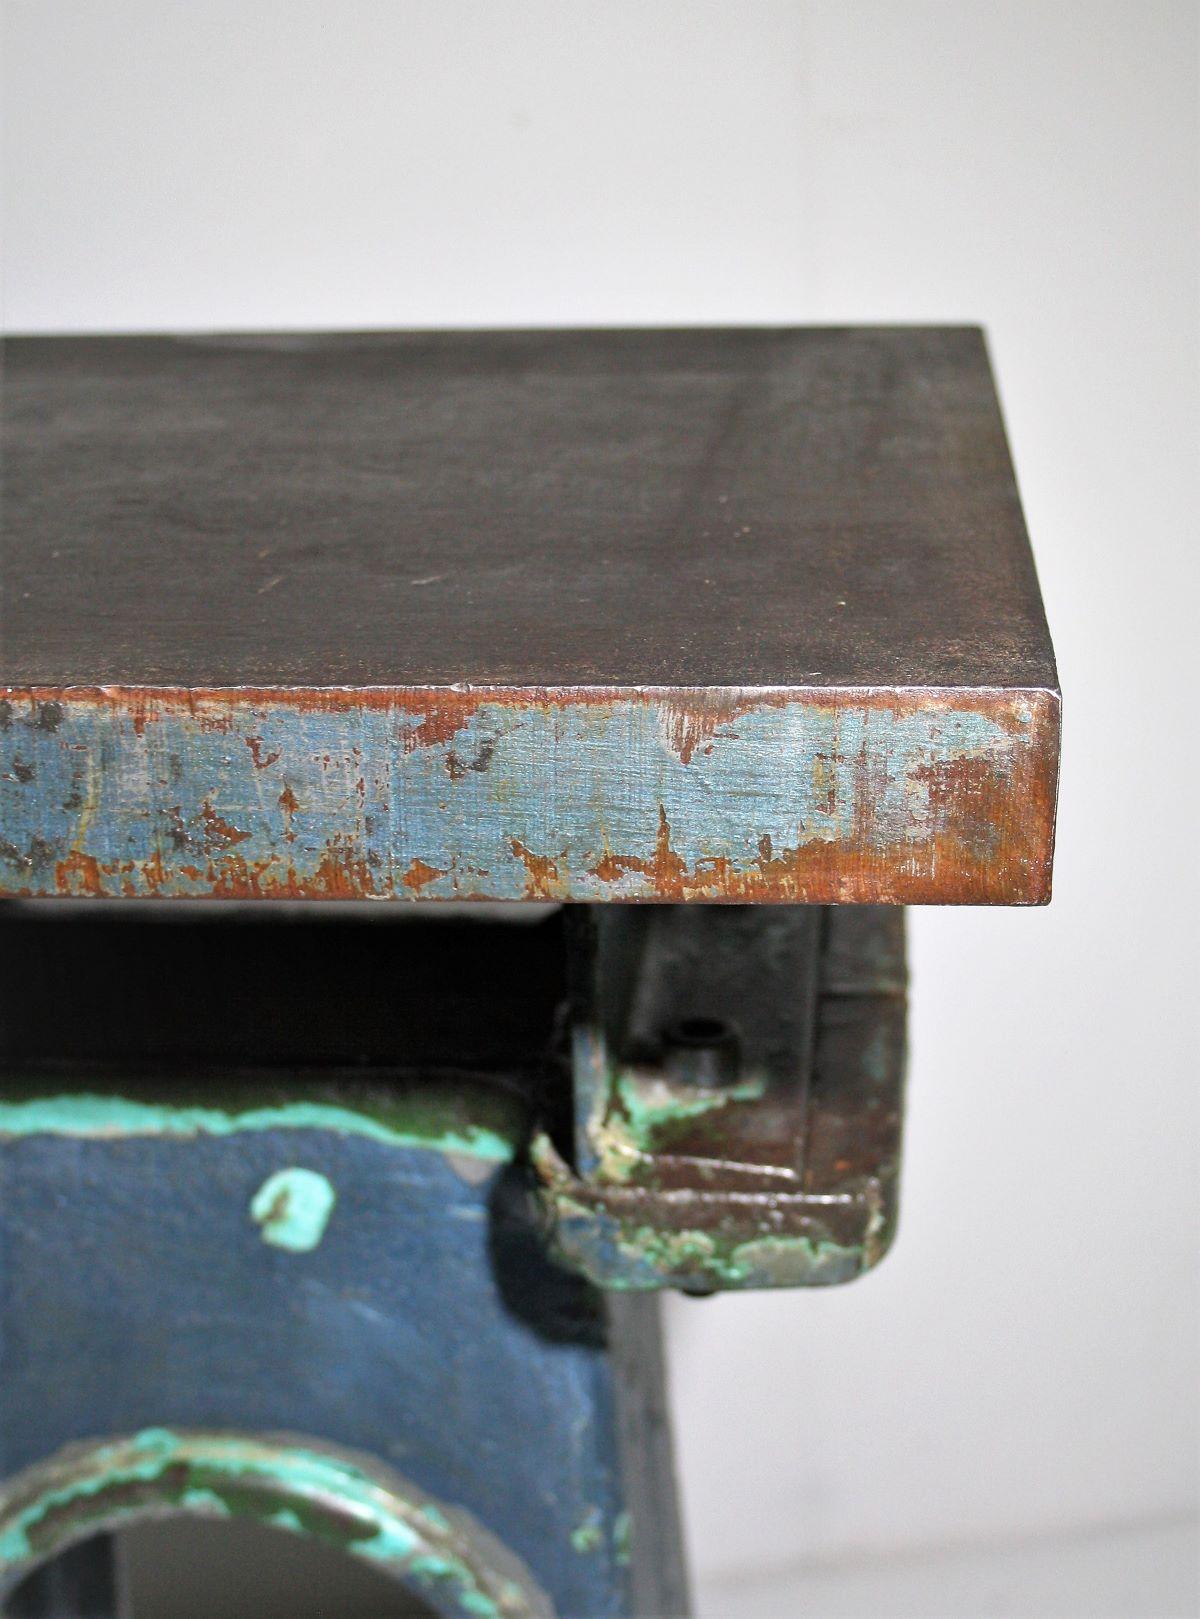 20th Century Small Industrial Heavy Form Cat Iron Engineers Table Superb Patina Colour